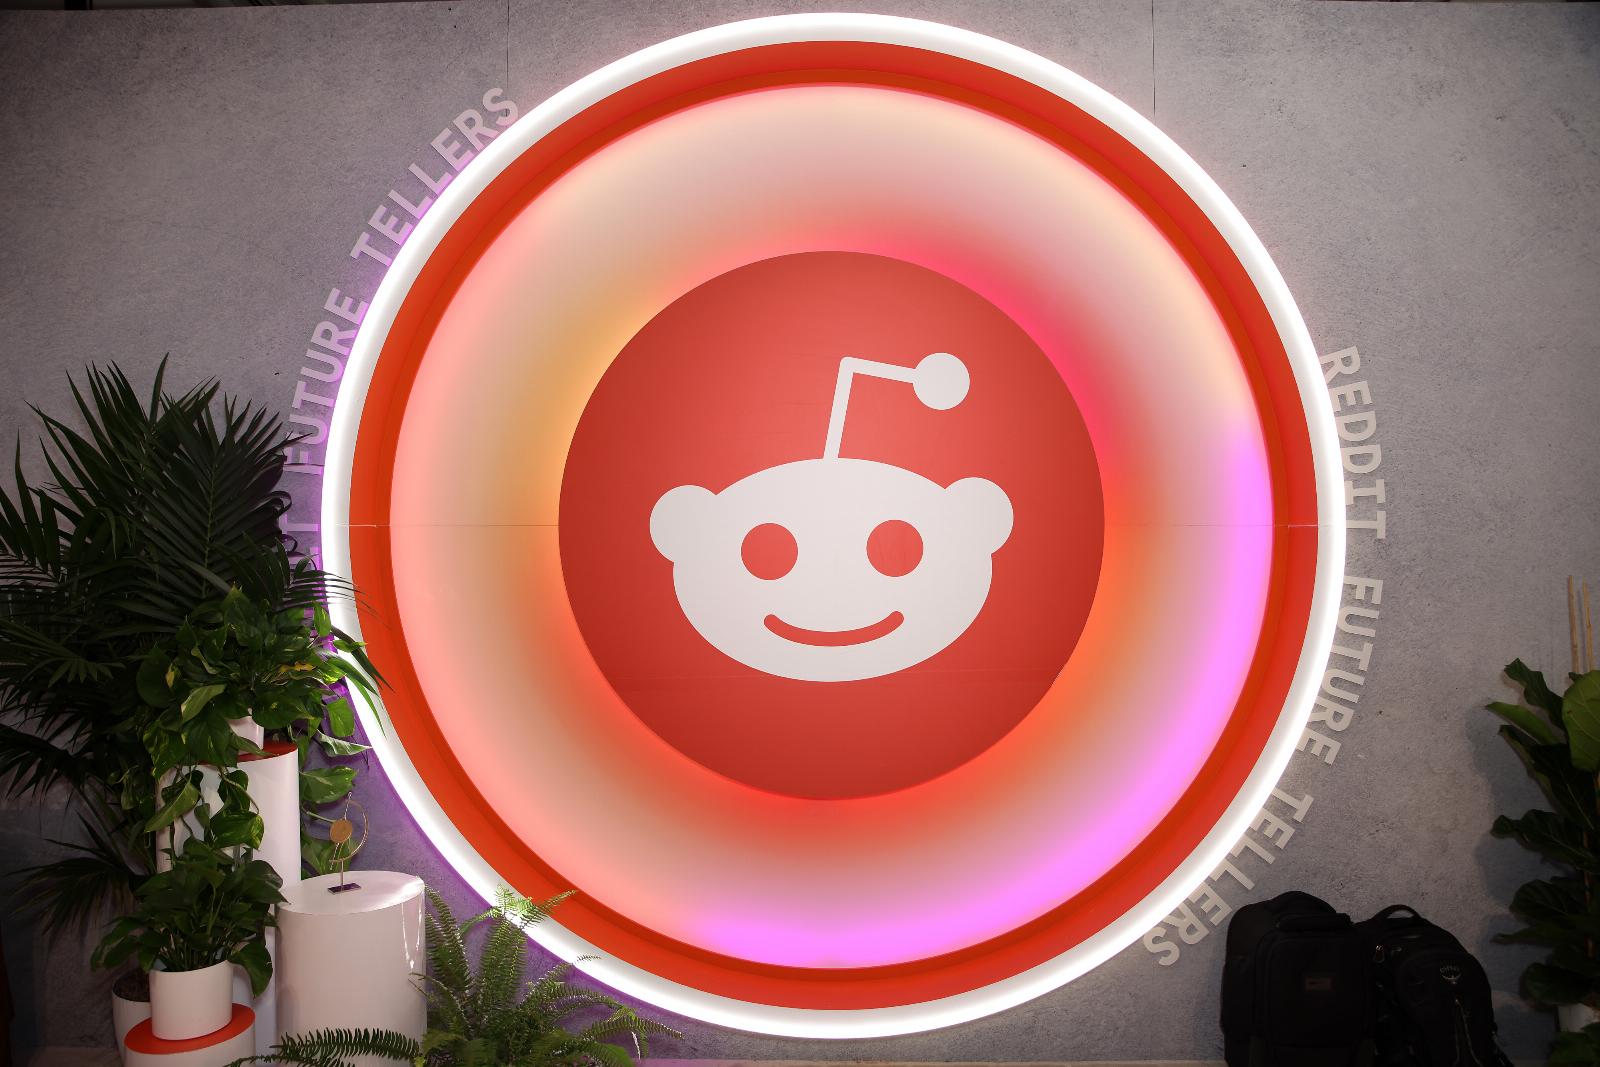 Multiple subreddits and moderators are protesting Reddit’s API changes